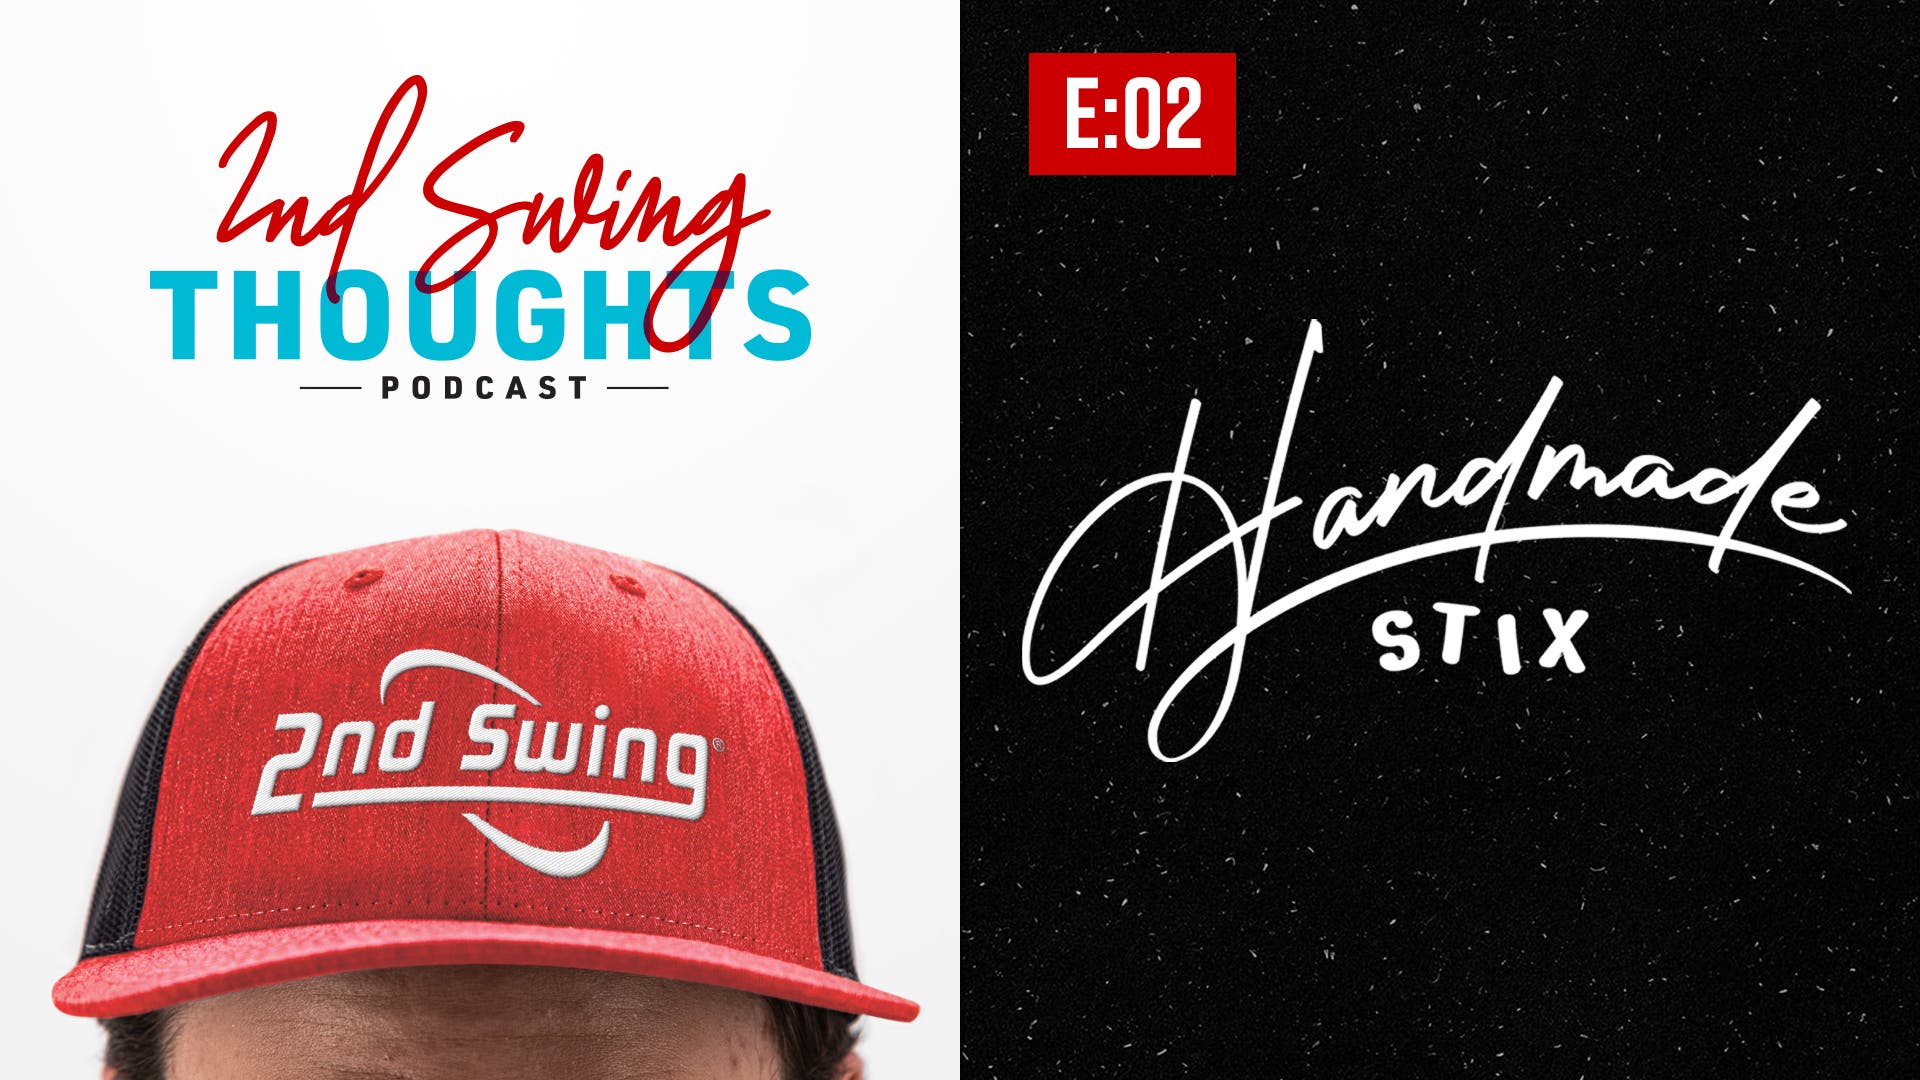 2nd Swing Thoughts Podcast | Episode 2: Handmade Stix